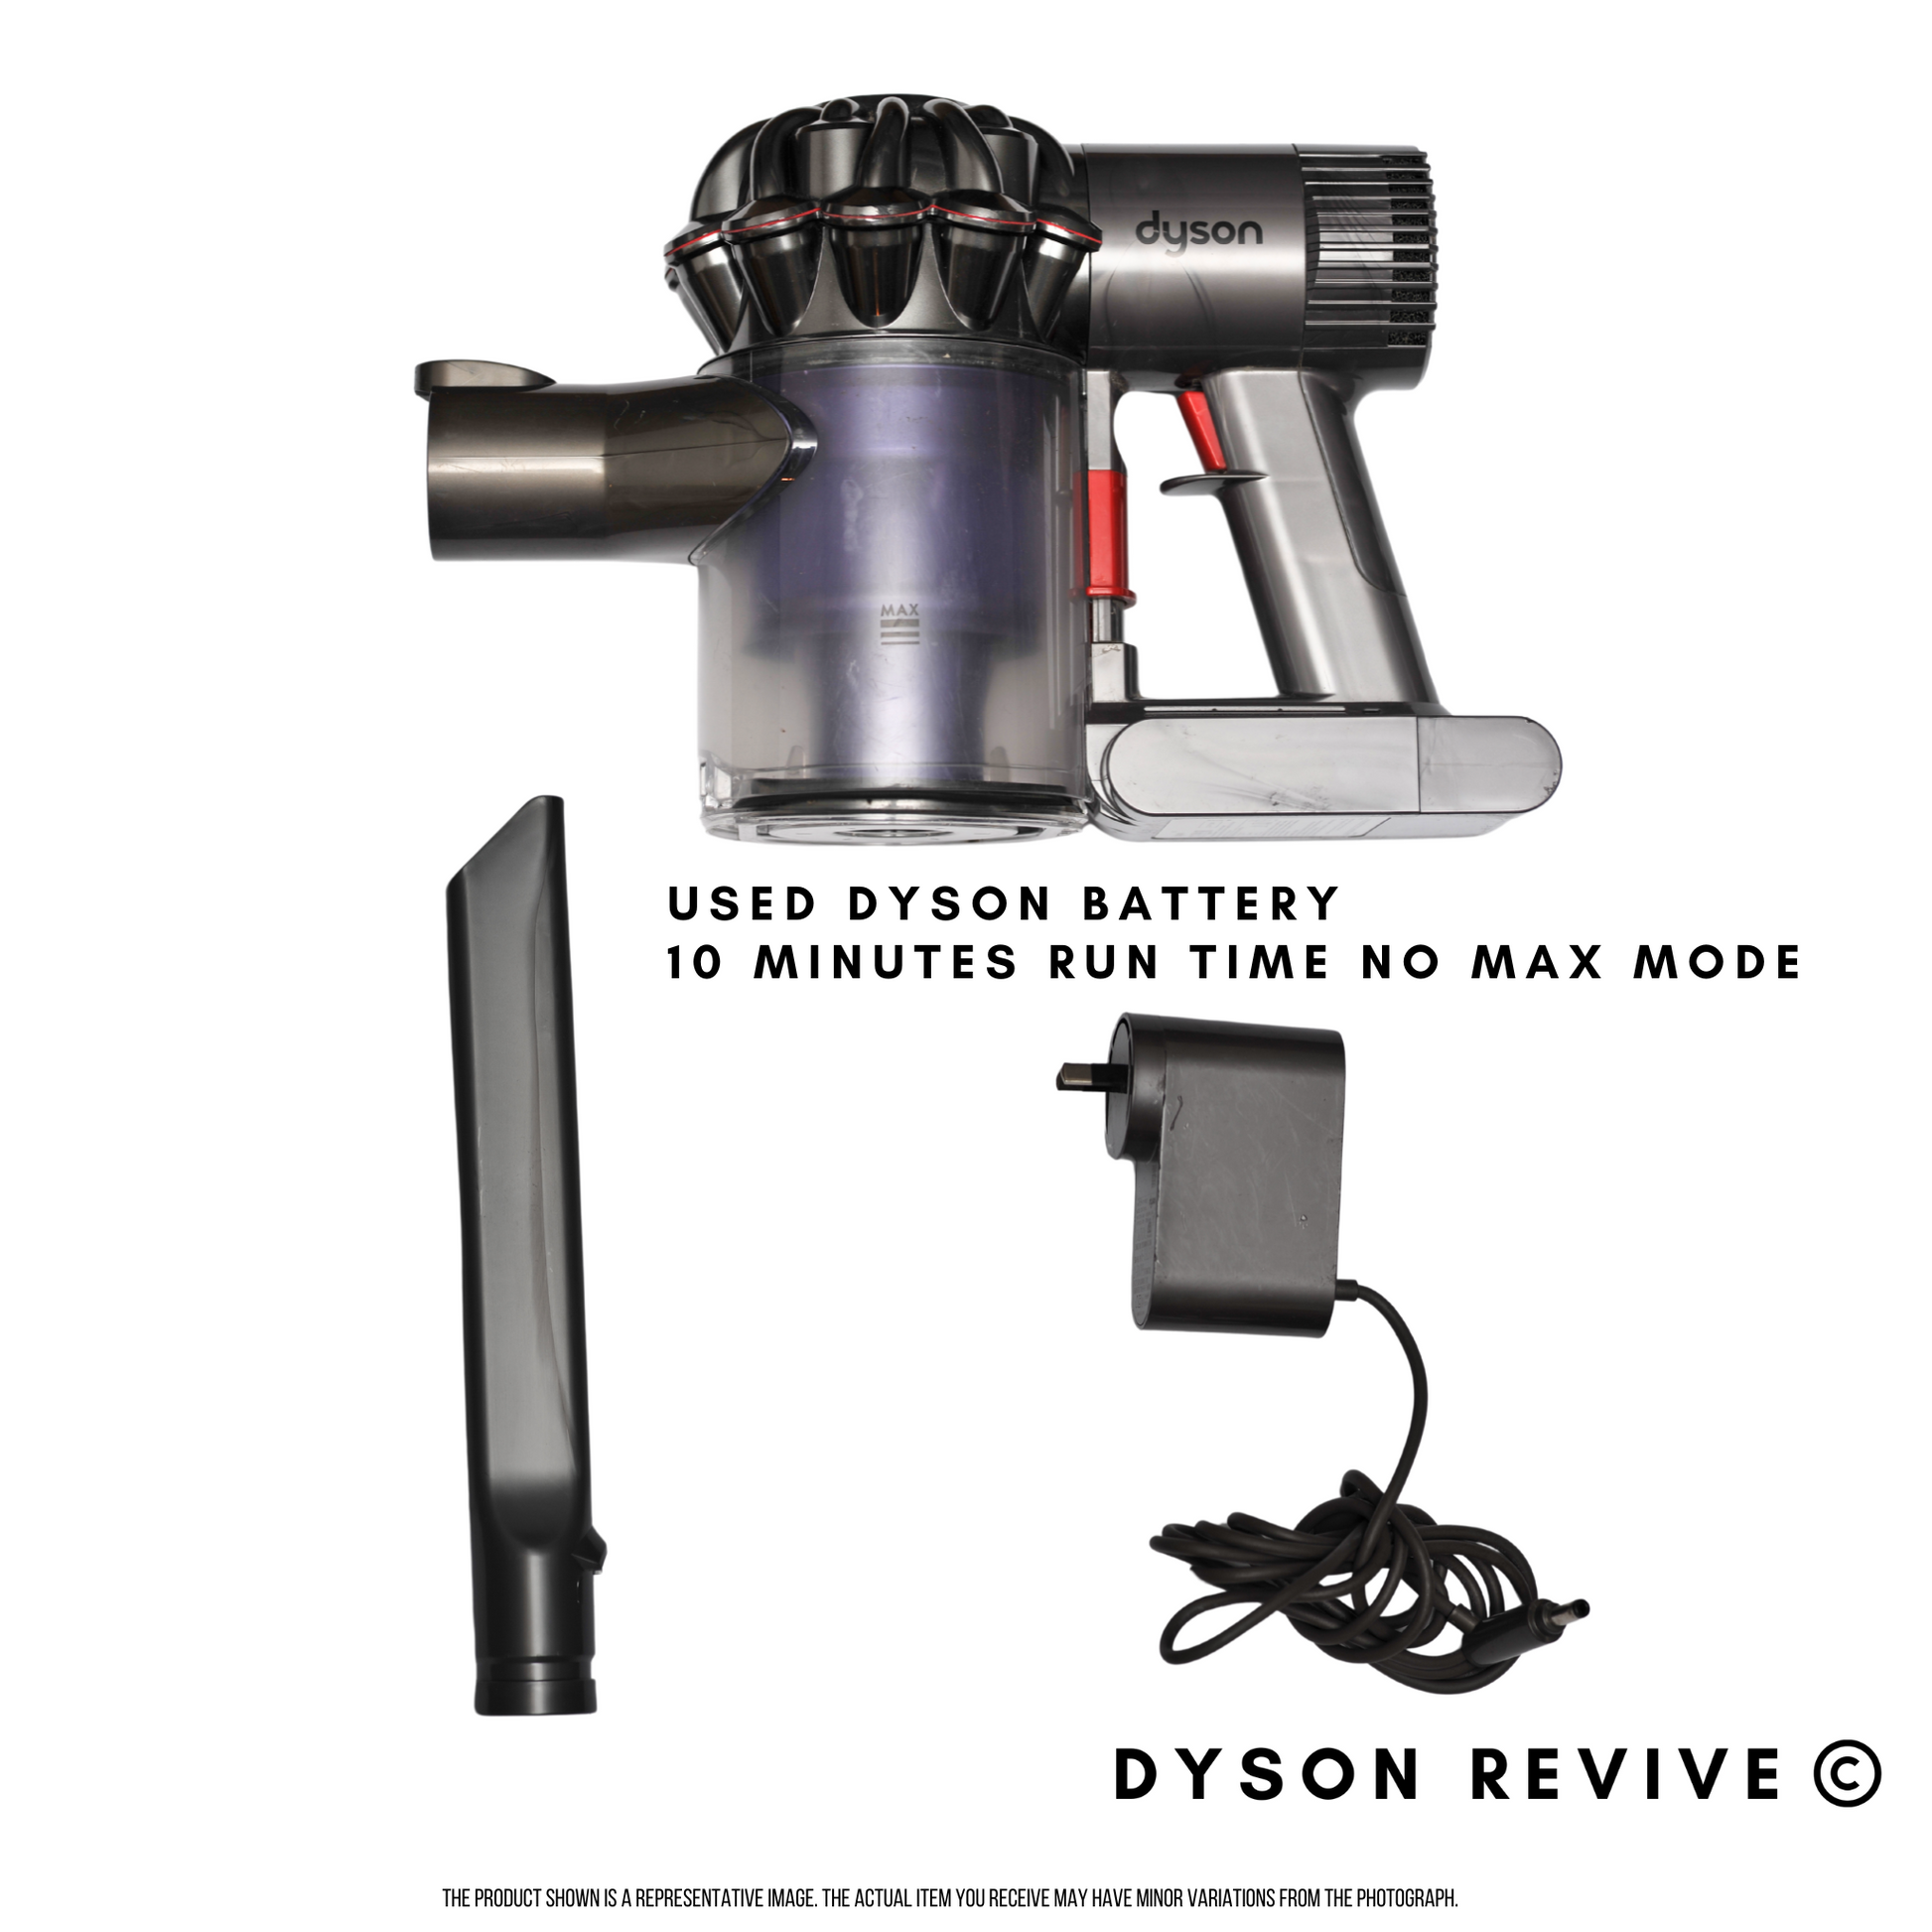 DC59/DC62/DC74/V6 Dyson Vacuum/Motor/Dustbuster/Car Handheld Vacuum with Used Dyson Battery - Dyson Revive